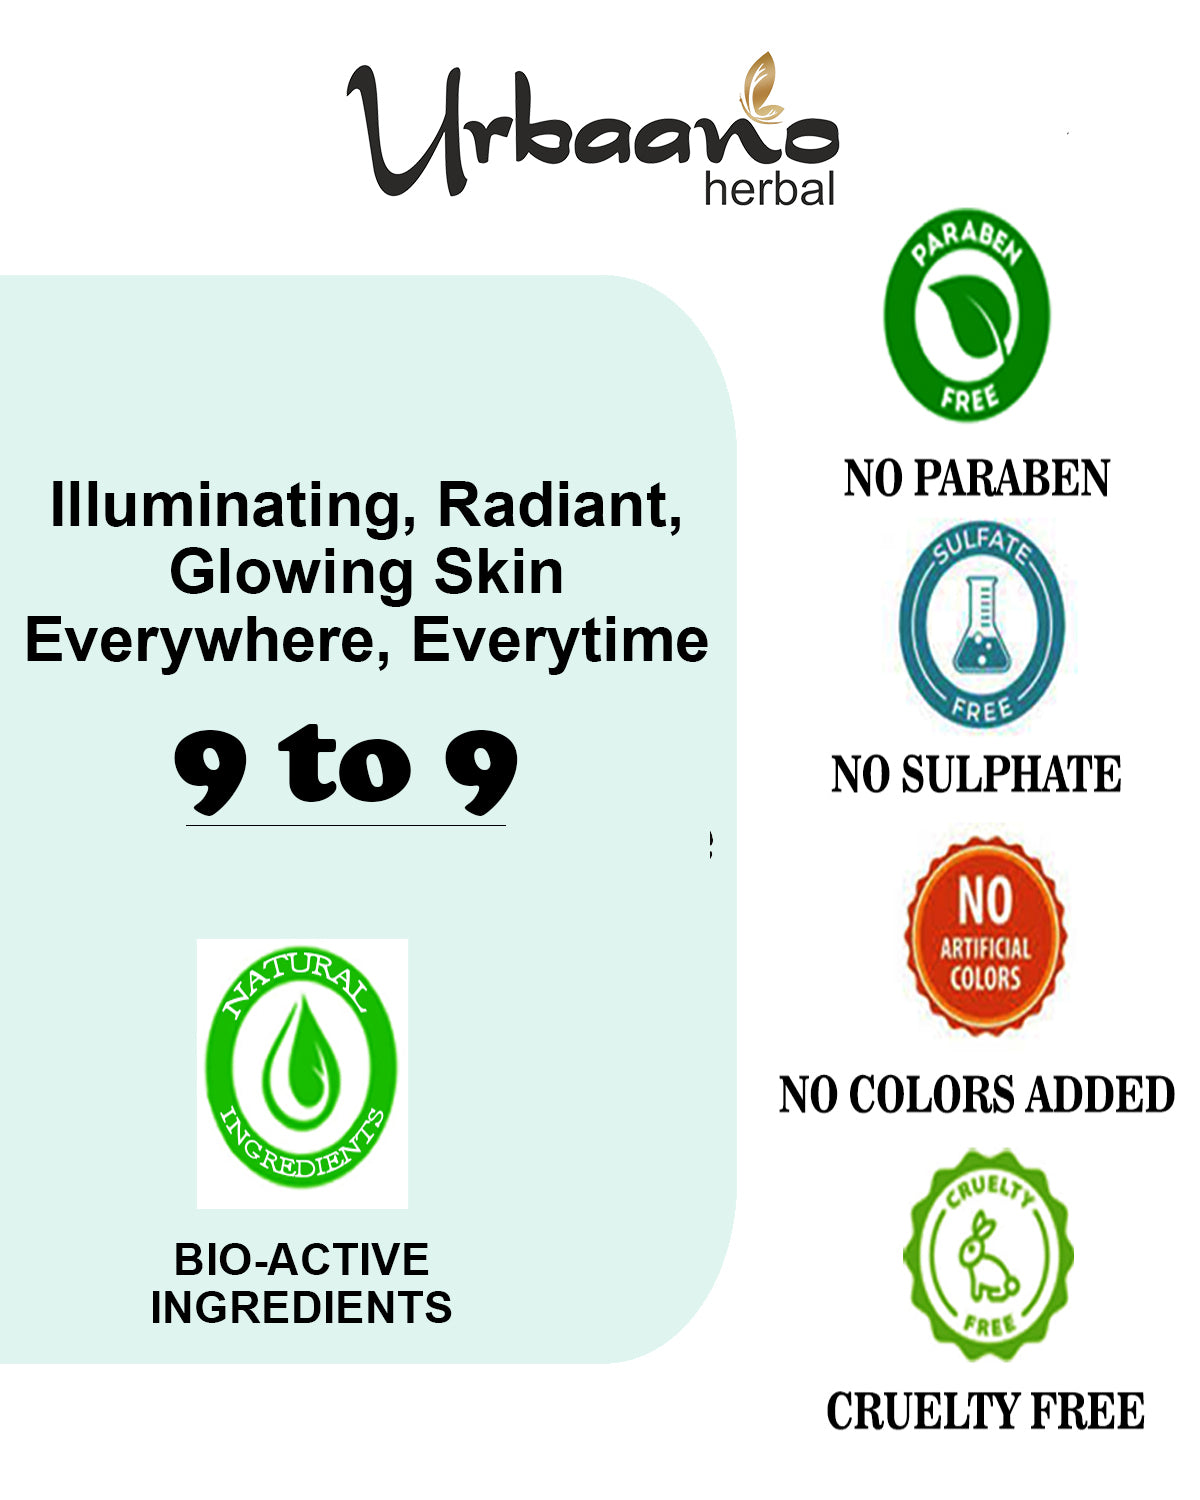 urbaano herbal skin brightening face cream and vitamin c white face serum with hyaluronic acid for glowing skin from 9-9, no sulphate, paraben, crulety 